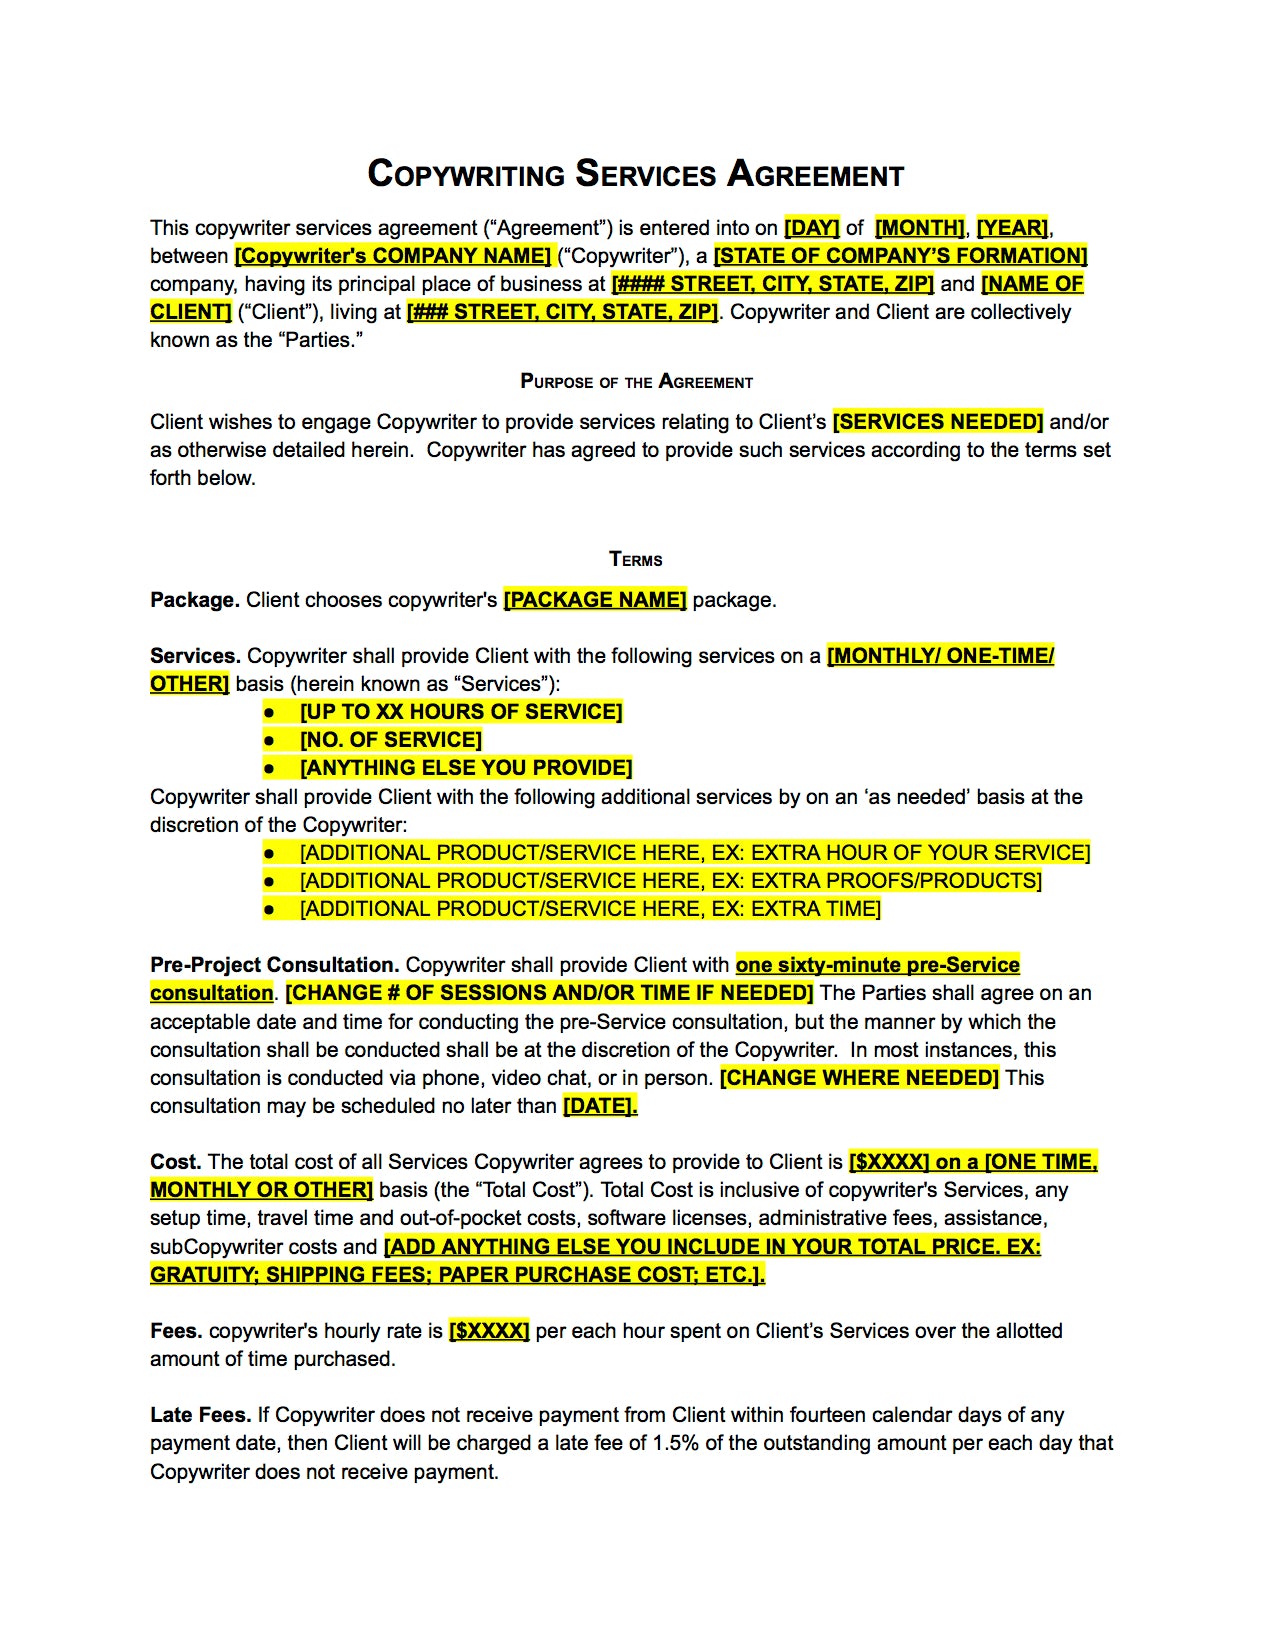 Copywriter Agreement Contract Template The Contract Shop®